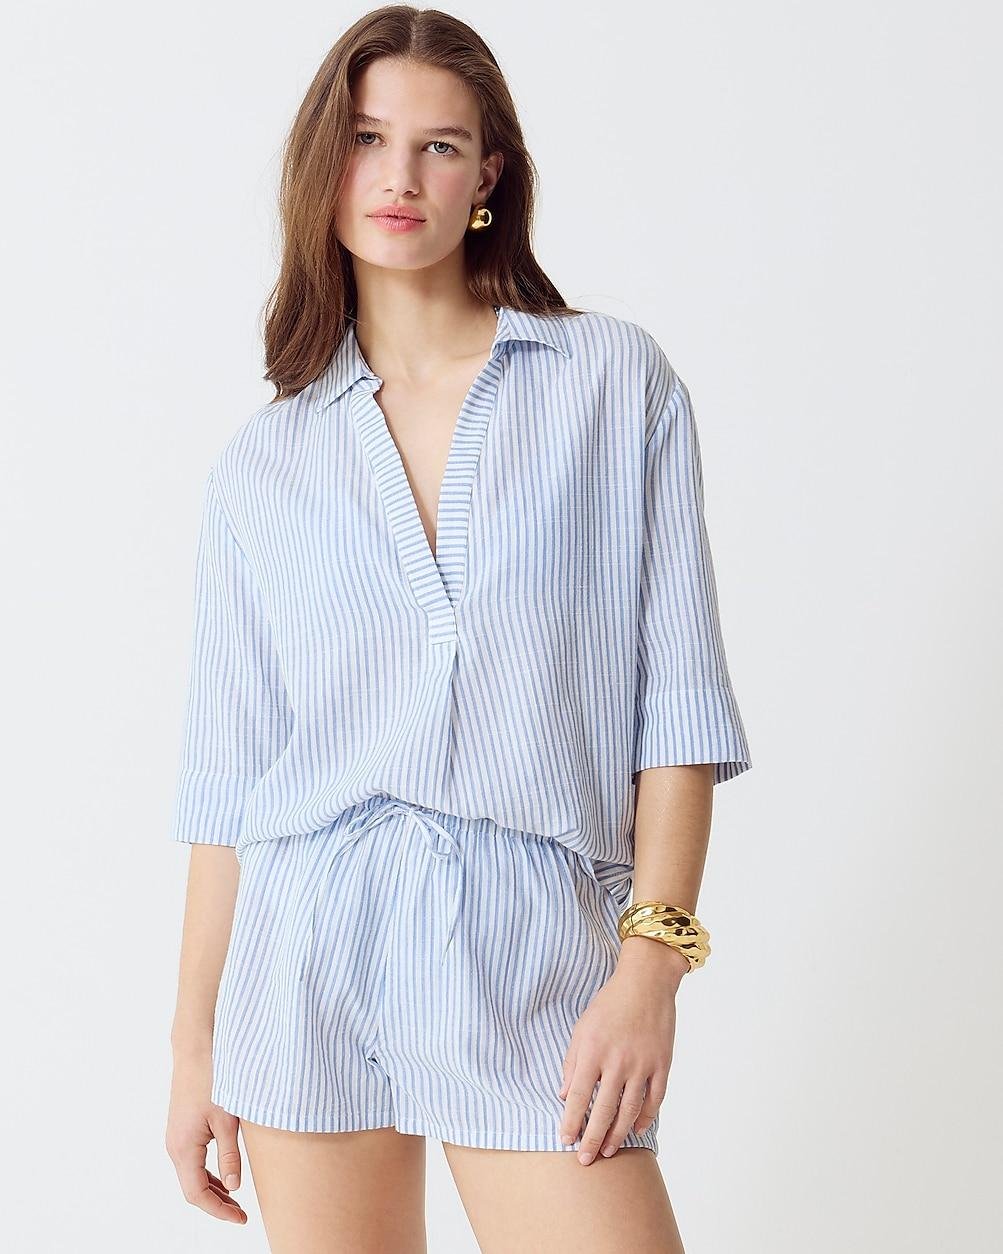 Popover shirt in striped airy gauze by J.CREW